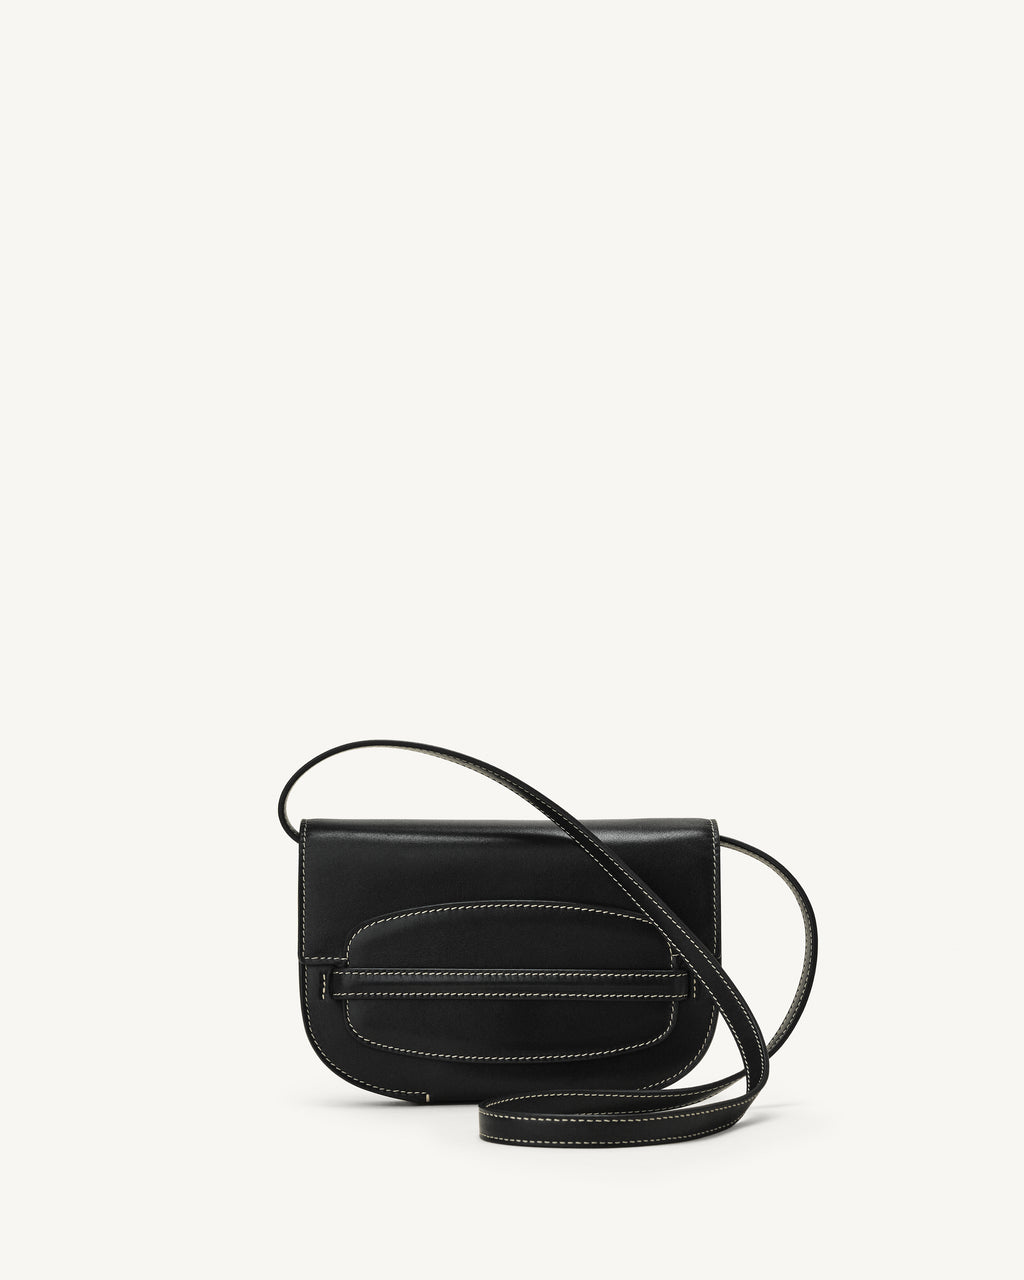 Sport Convertible Clutch in Black Leather